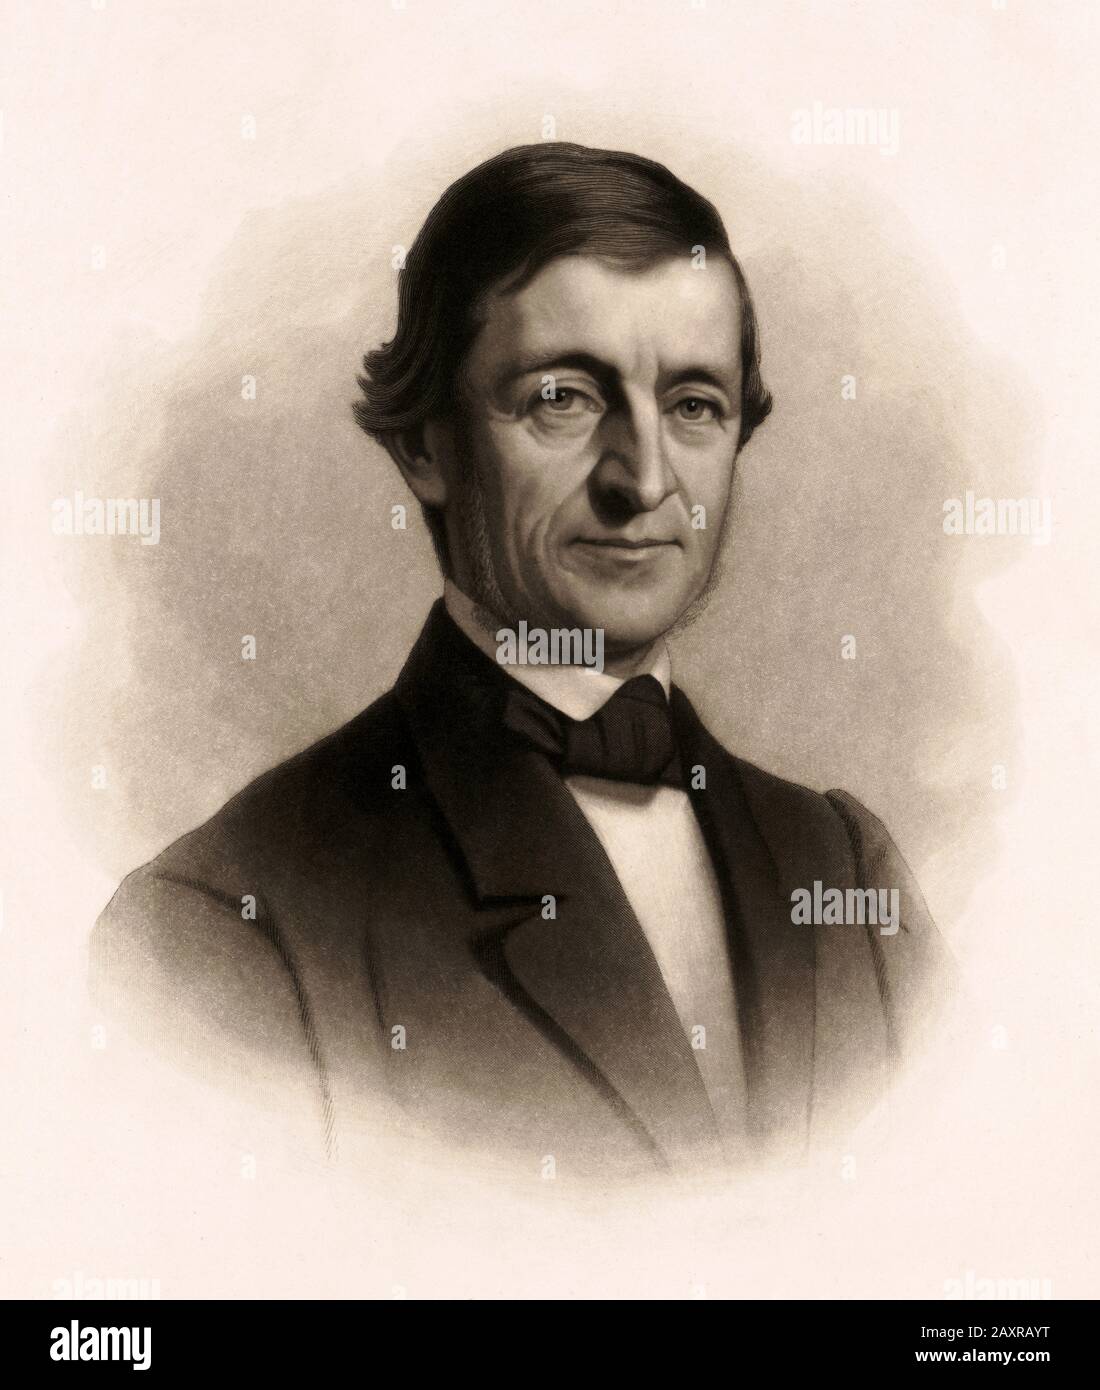 1871, USA : Portrait of american celebrated philosopher and poet RALPH WALDO EMERSON ( 1803 - 1882 ) . Portrait engraved by Emily Sartain ( 1841 - 1927 ) from an unfinished portrait by William Henry Furness  Jr. ( 1827- 1867 ).- POETA - POESIA - FILOSOFO - FILOSOFIA - PHILOSOPHY - POETRY - LETTERATO - SCRITTORE - LETTERATURA - Literature - PORTRAIT - RITRATTO - engraving - incisione - illustrazione - illustration ---  Archivio GBB Stock Photo